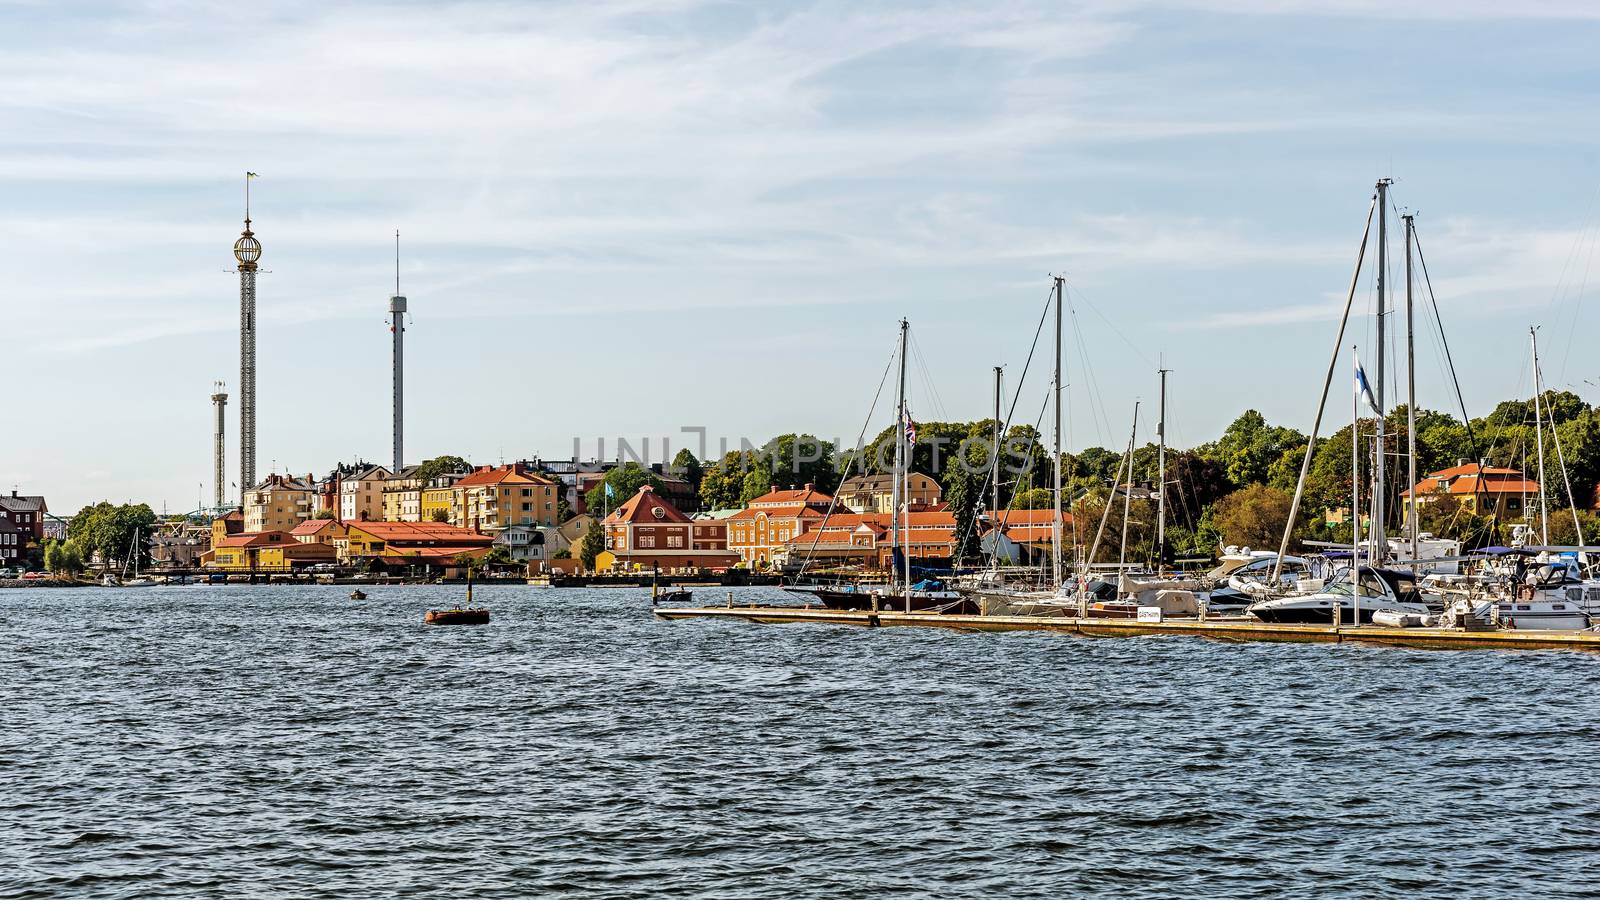 Distant view on Grona Lund, the amusement park on the Djurgarden Island in Stockholm. The park is located amongst the old 19th century buildings originally designed not for the park.